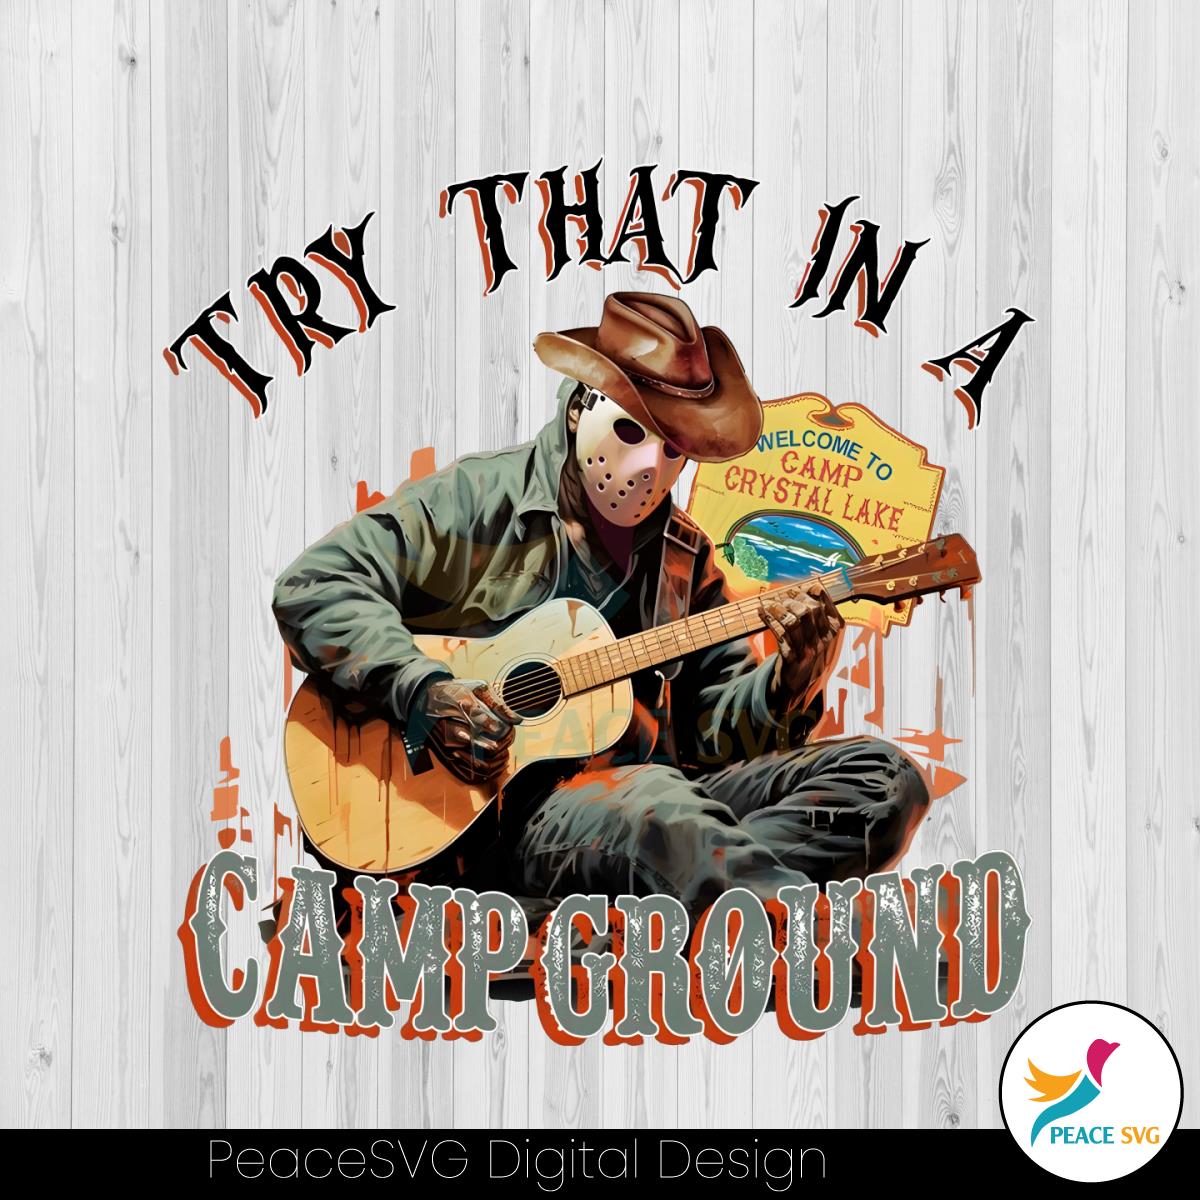 try-that-in-a-campground-western-halloween-png-download